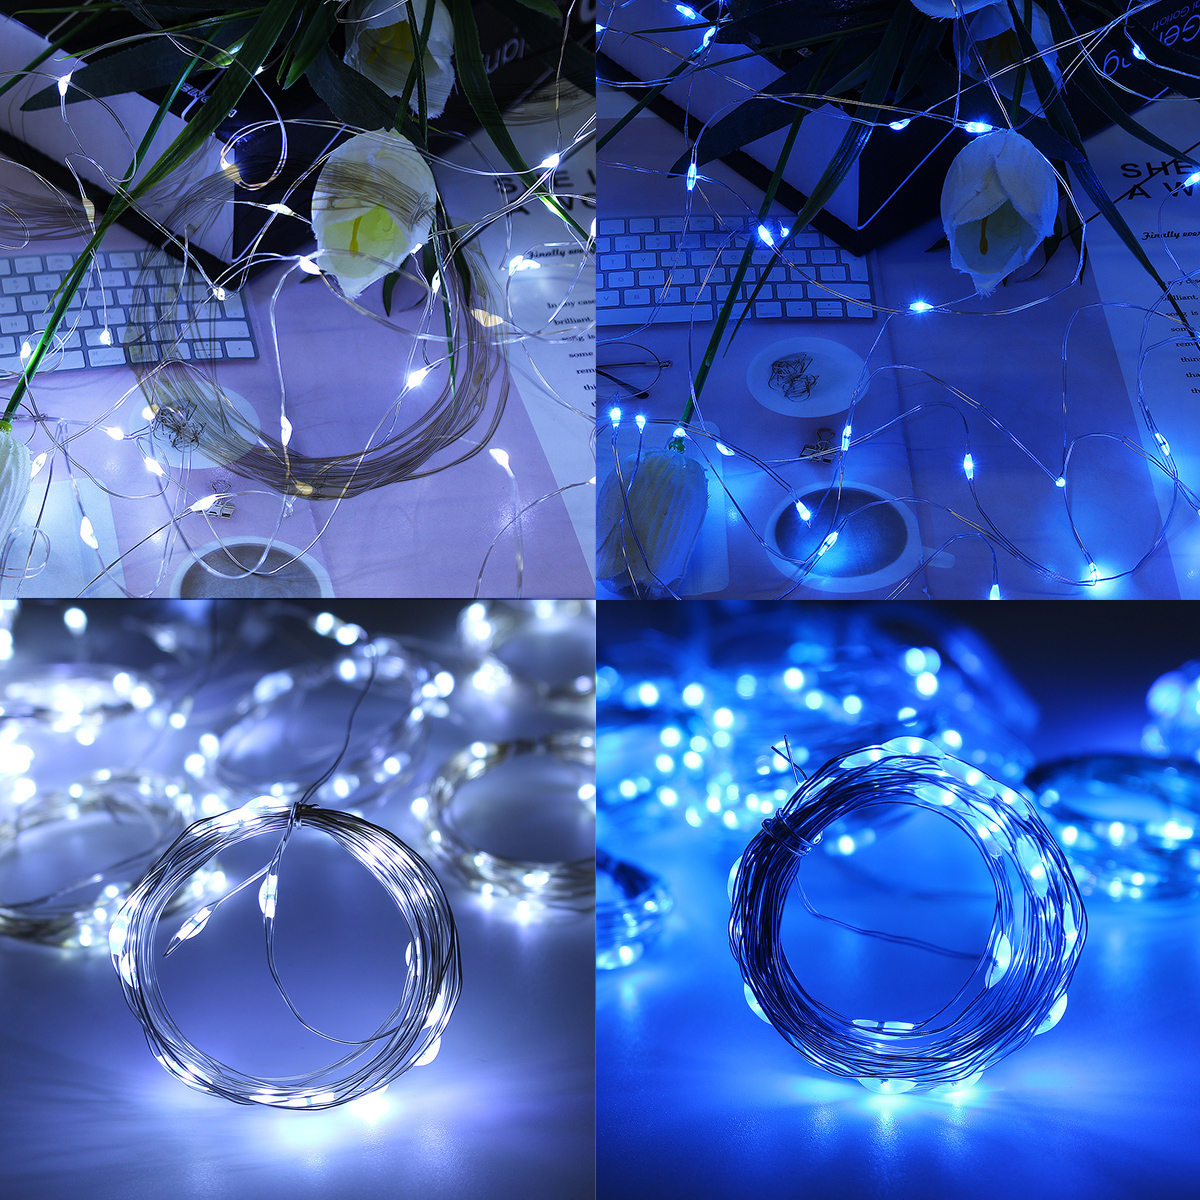 USB-5V-RC-Remote-Control-200300LED-Curtain-Lamp-String-Fairy-Lights-Indoor-Outdoor-Garden-Party-Wedd-1773781-11